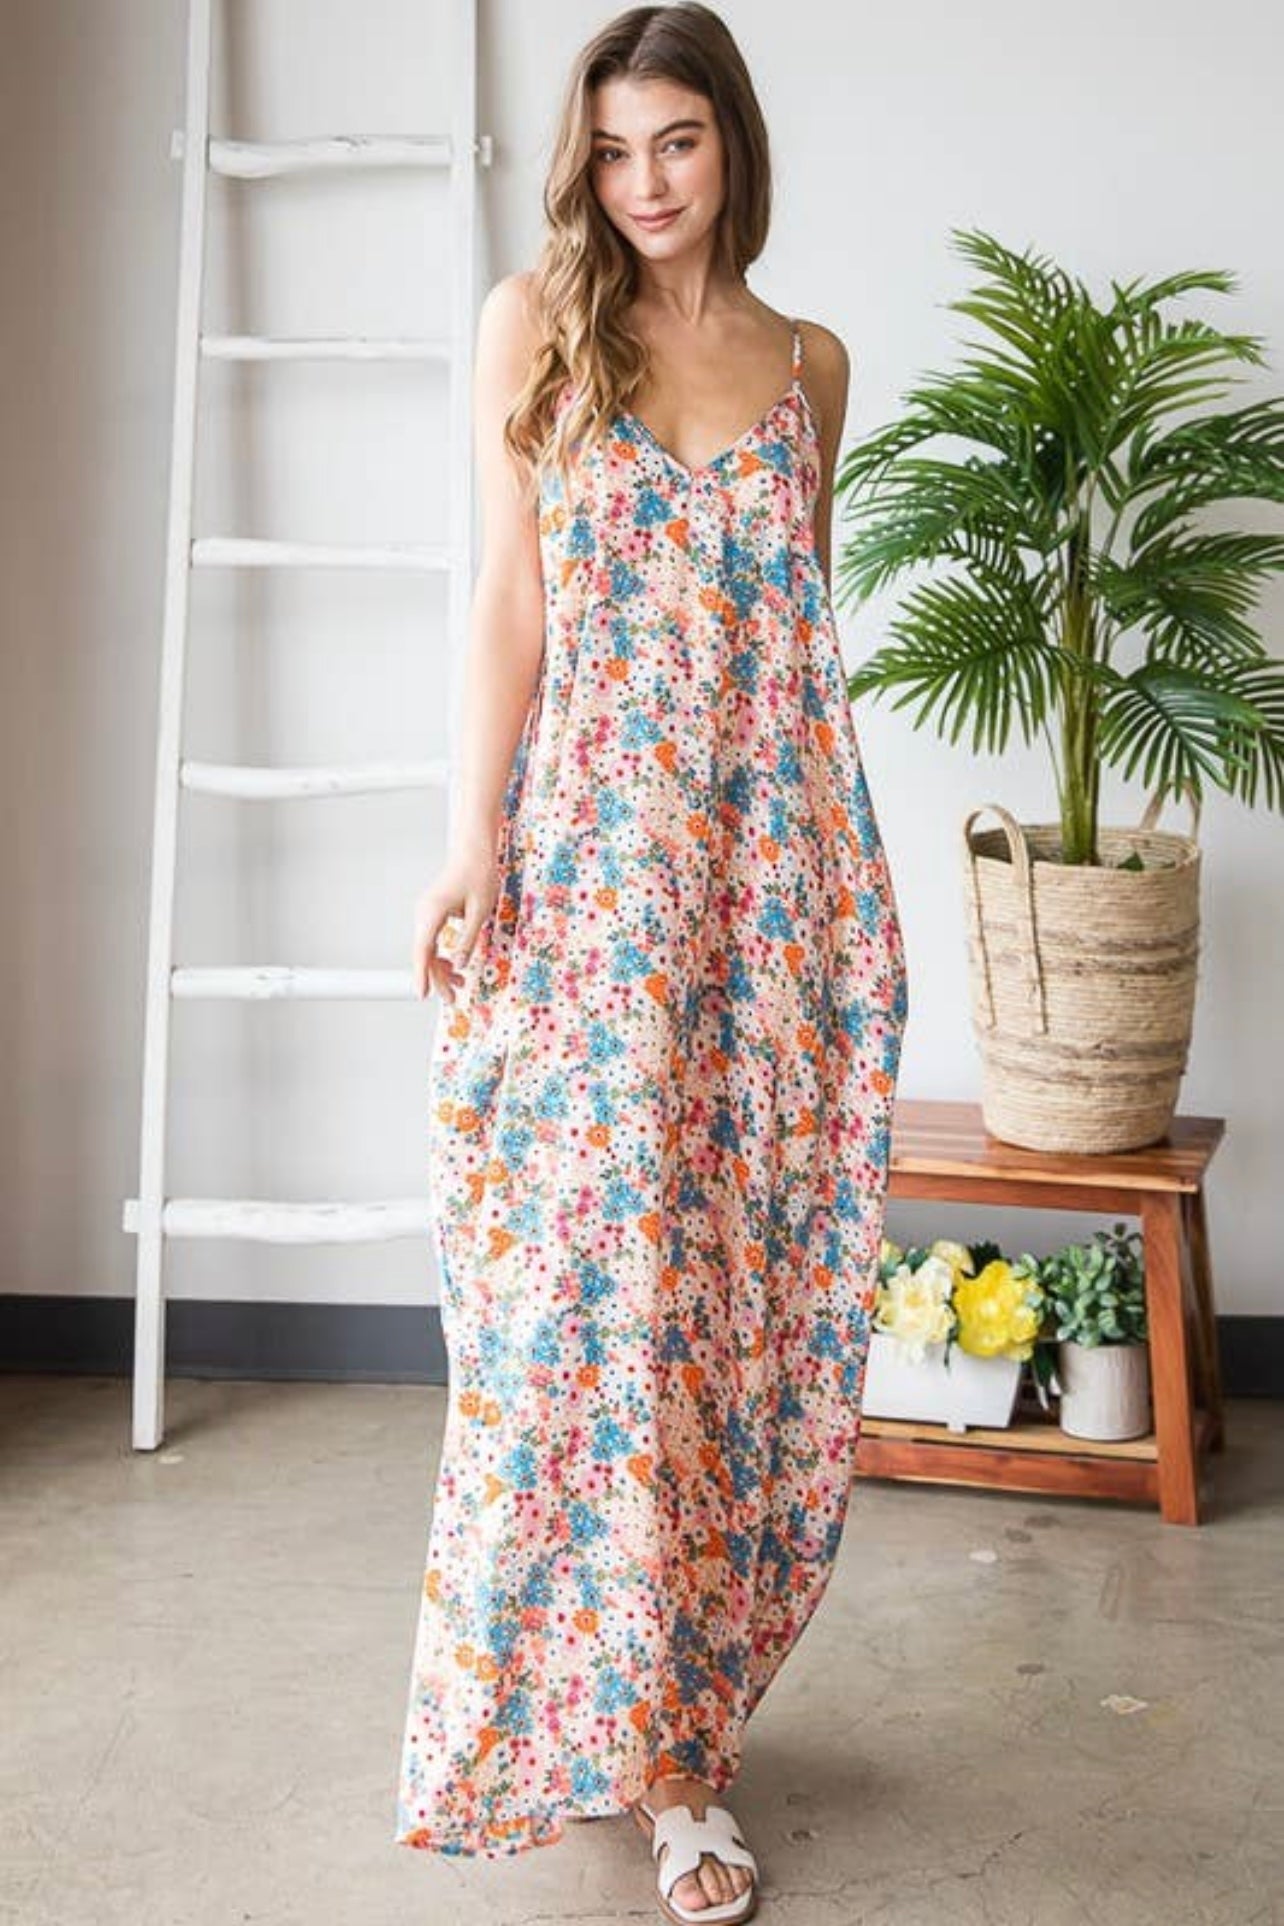 MULTI COLOR FLORAL MAXI DRESS WITH POCKETS